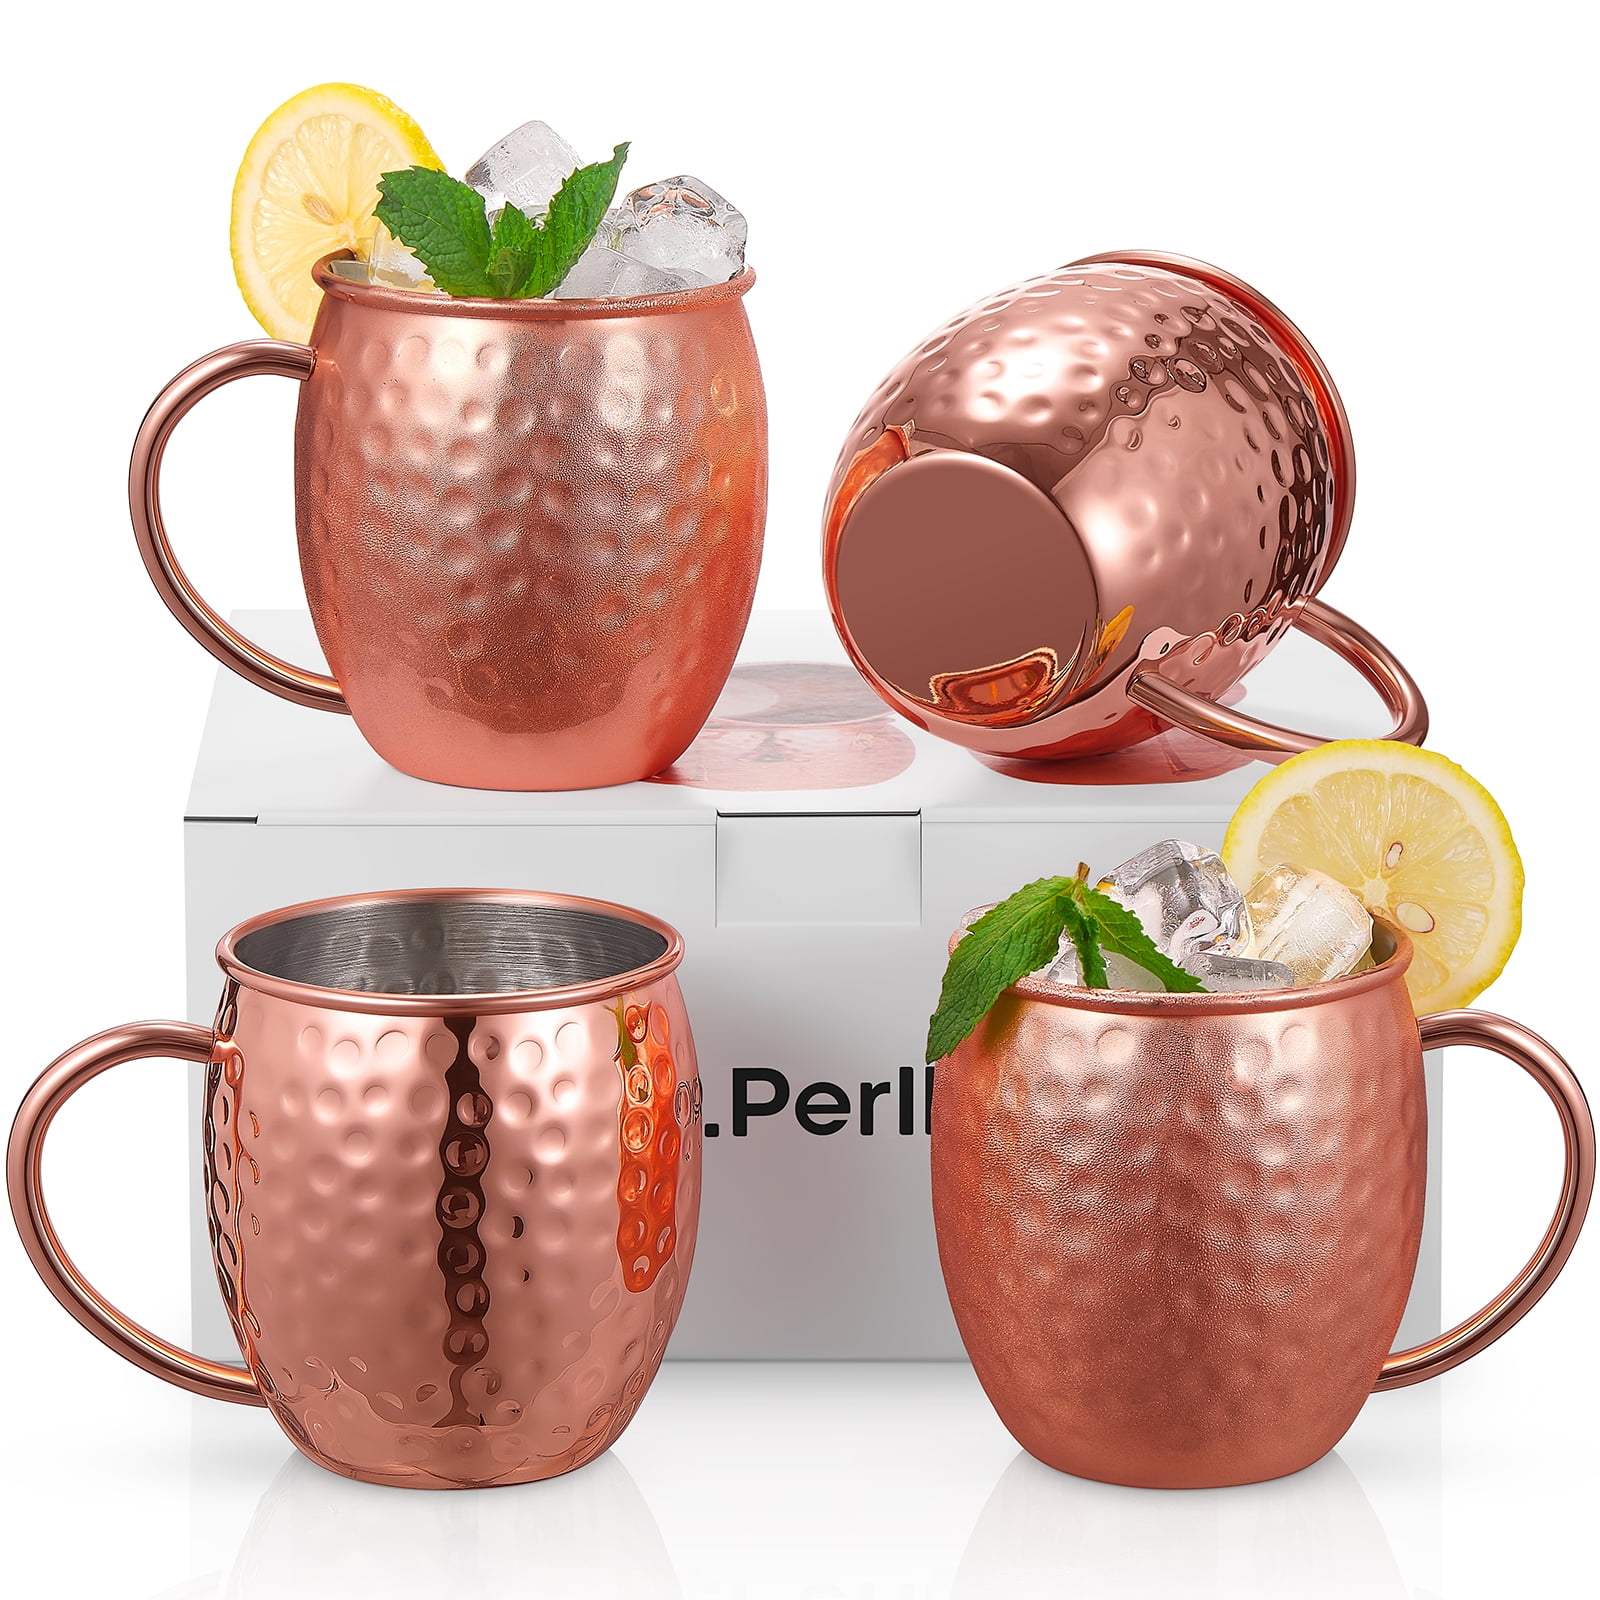 Cambridge EAHMM1CPCB1BM 20 oz Hammered Copper Moscow Mule Mugs, Set of 2